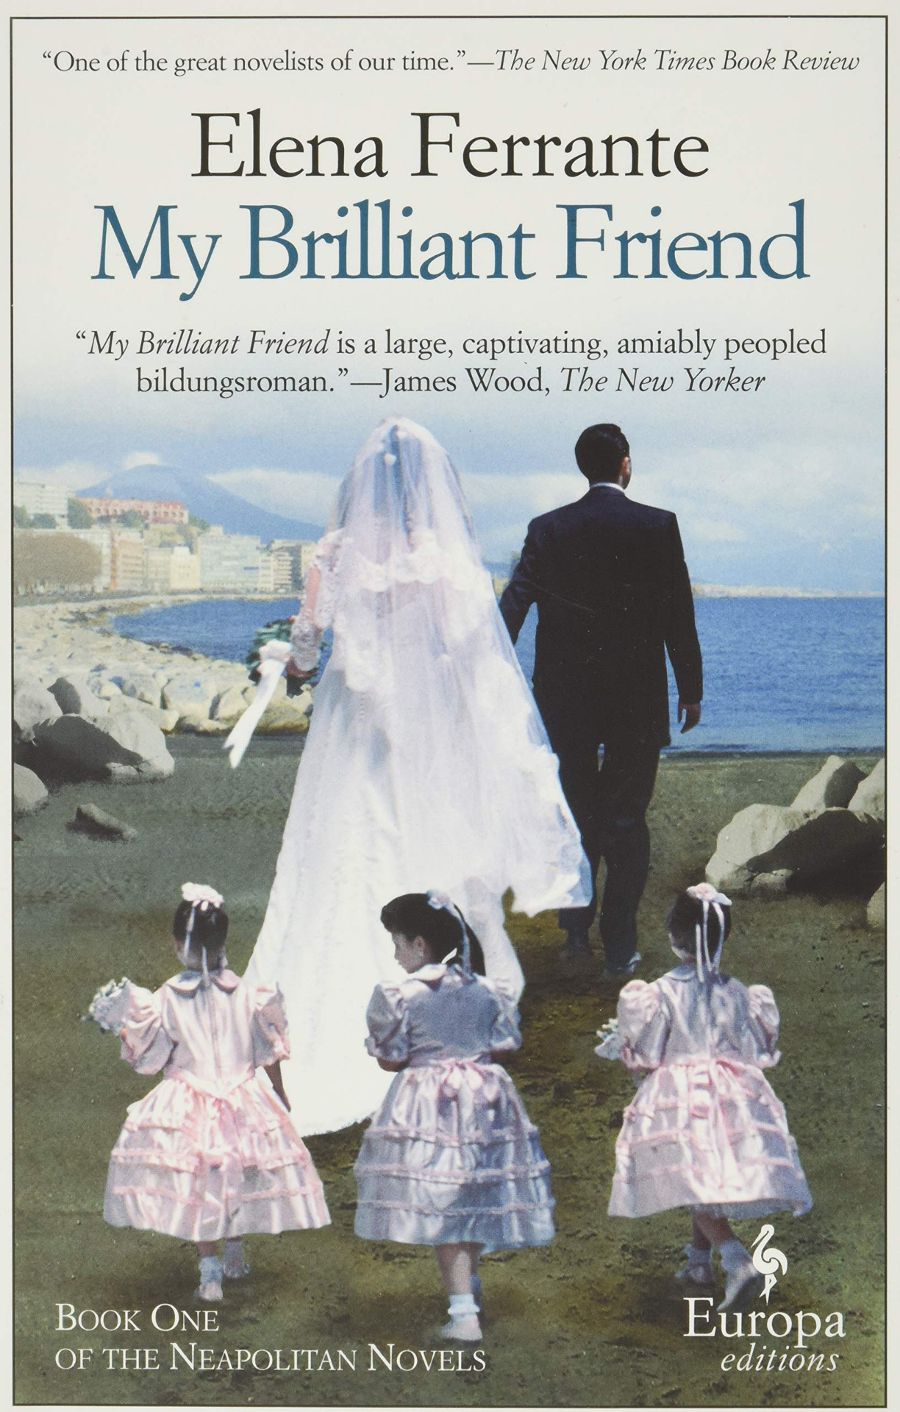 elena ferrante best books you've been meaning to read